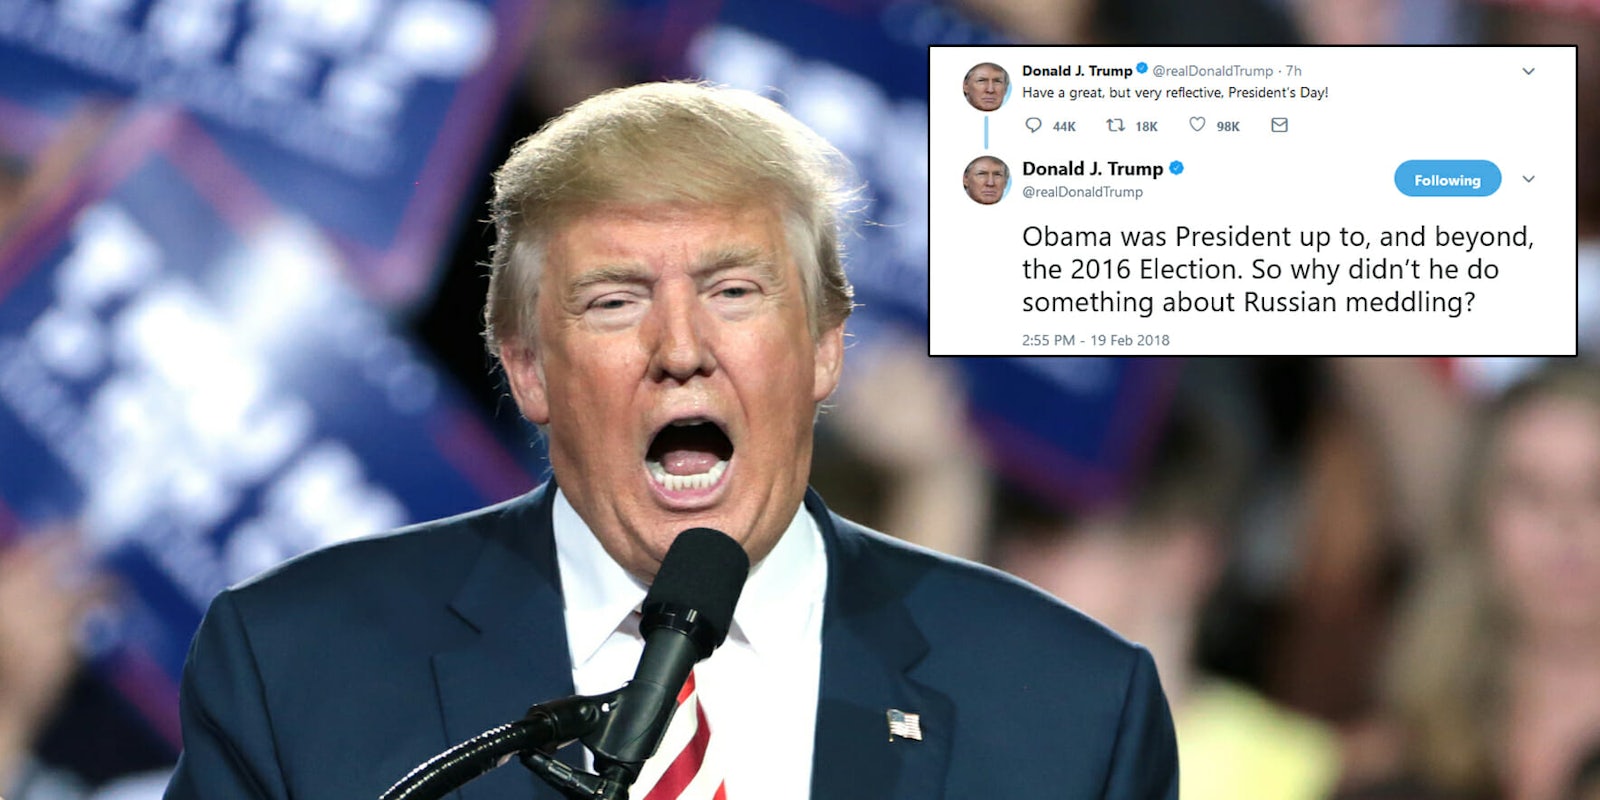 President Donald Trump followed up his seemingly innocuous tweet about Presidents' Day by openly questioning former President Barack Obama's response to Russia's meddling in the 2016 presidential election.